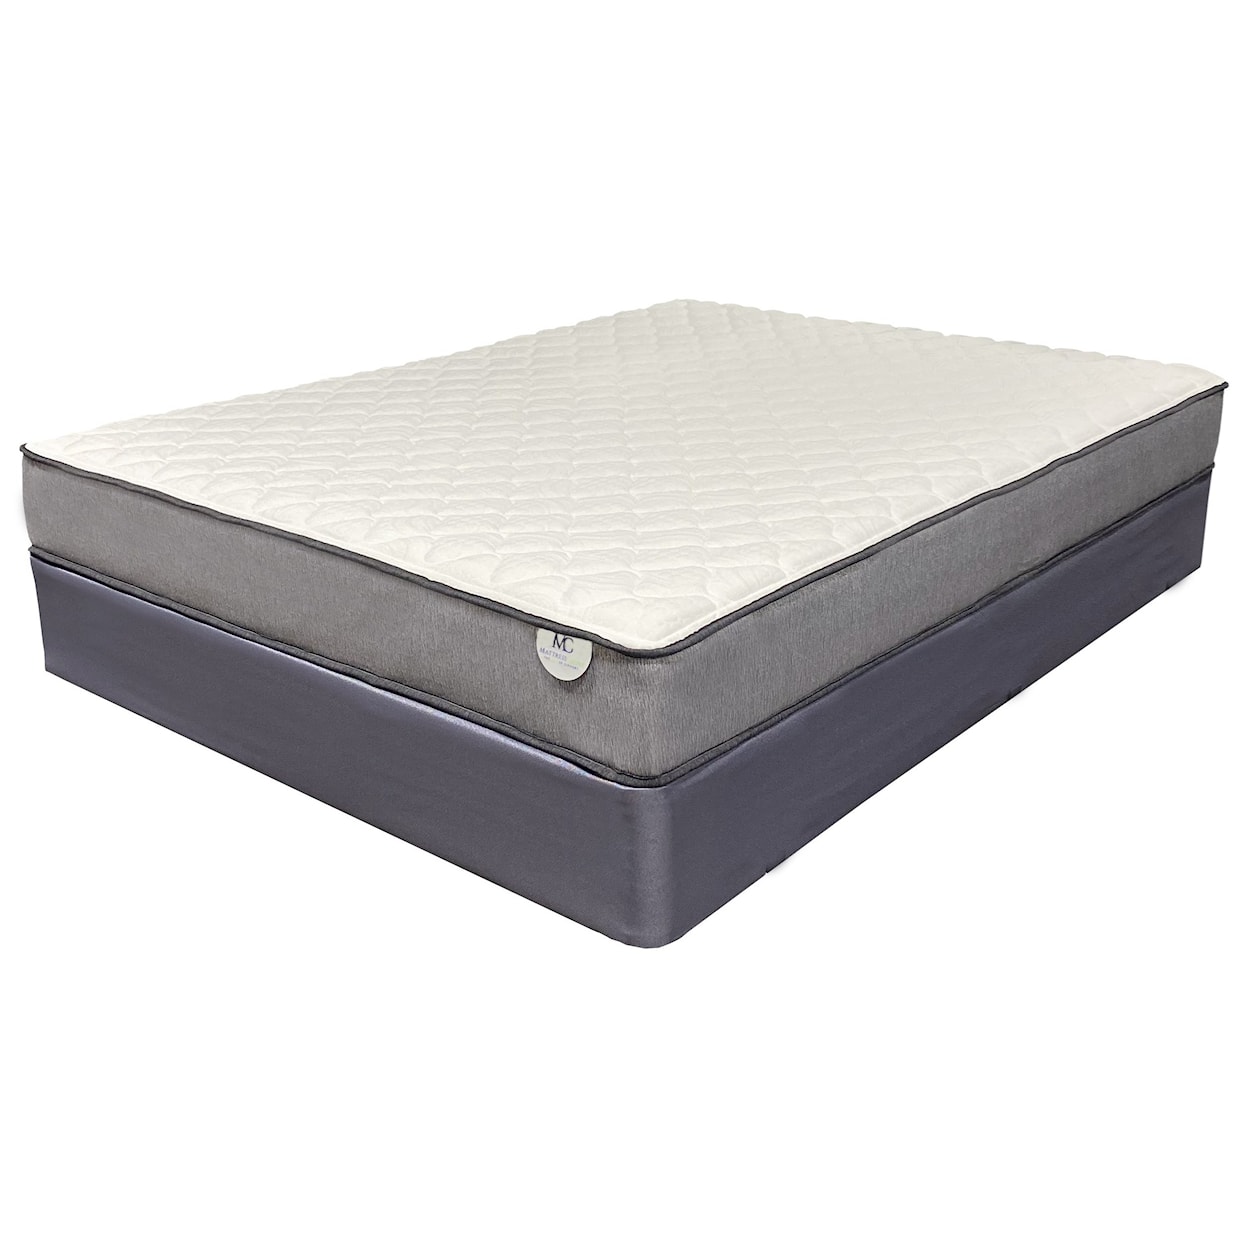 Spring Air MG Andes Firm Queen Firm Mattress